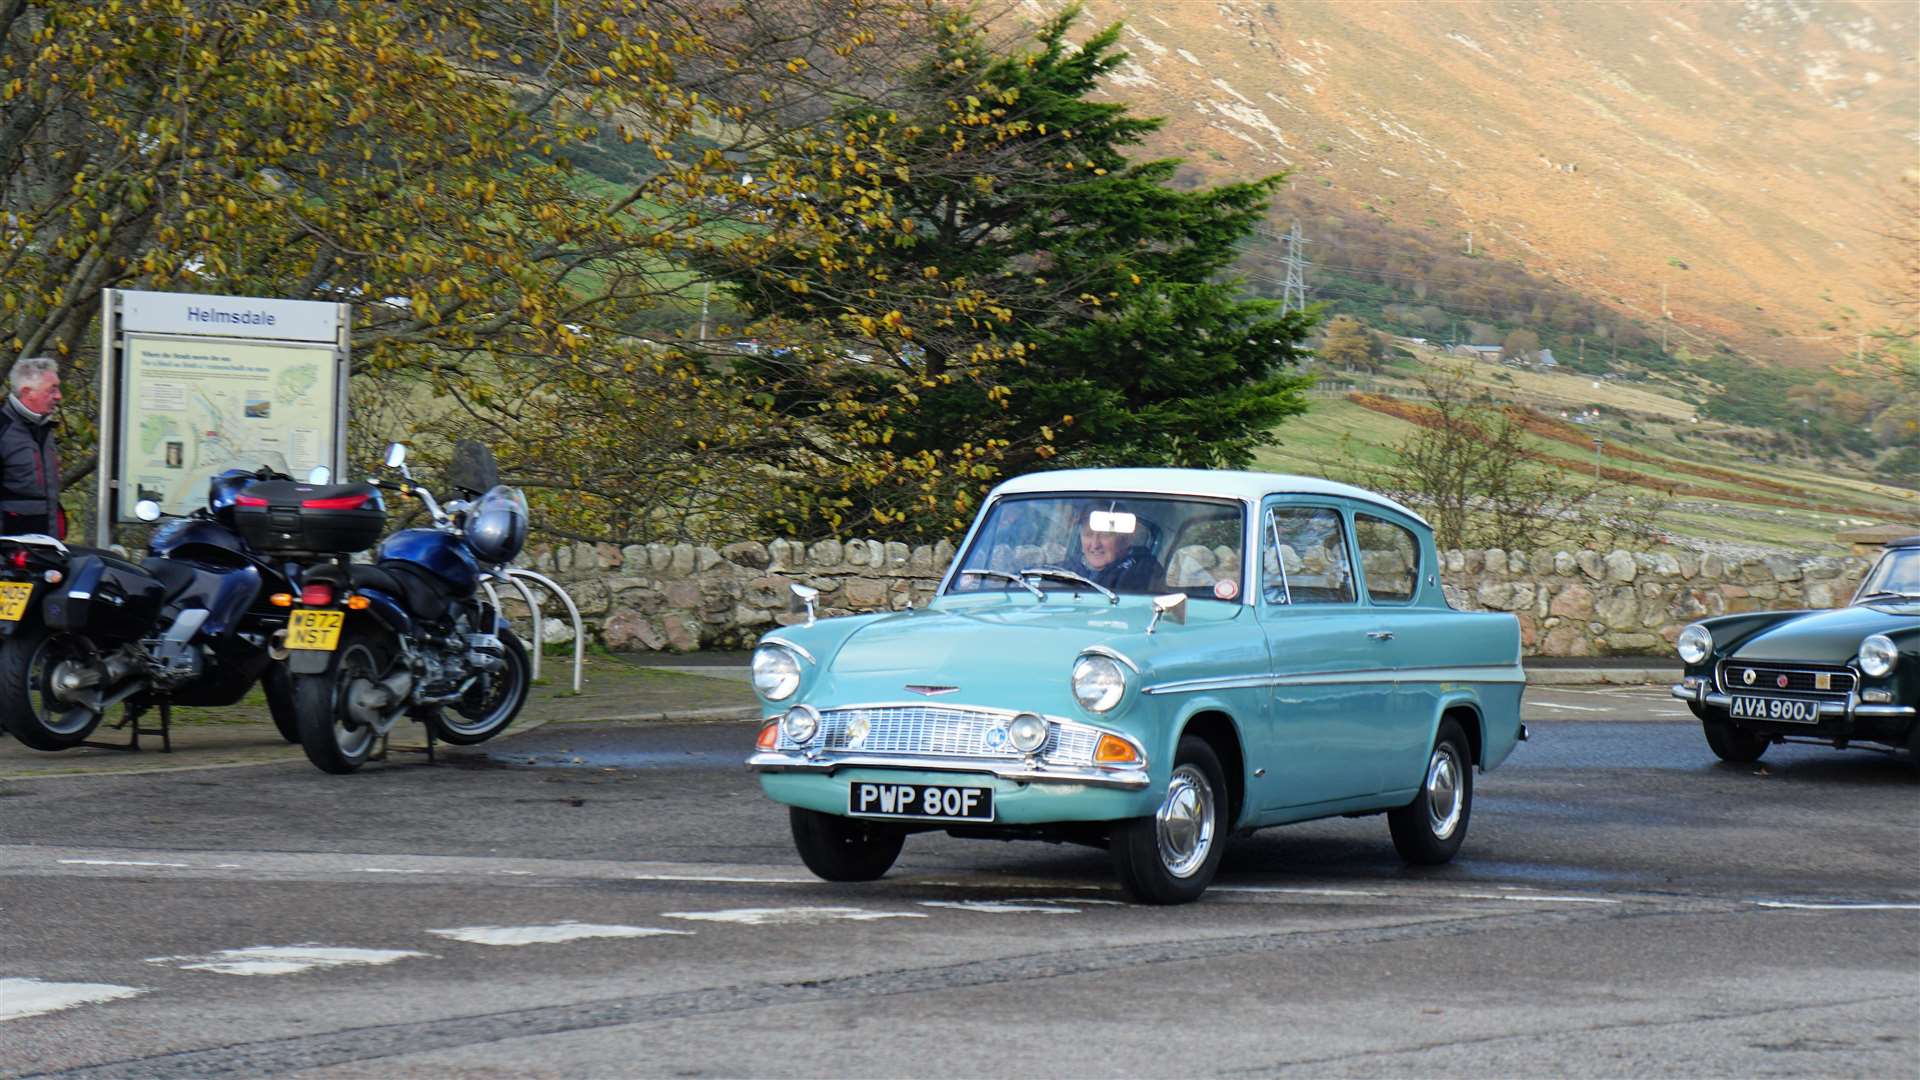 This gleaming 1967 reg Ford makes its way from Helmsdale. Picture: DGS